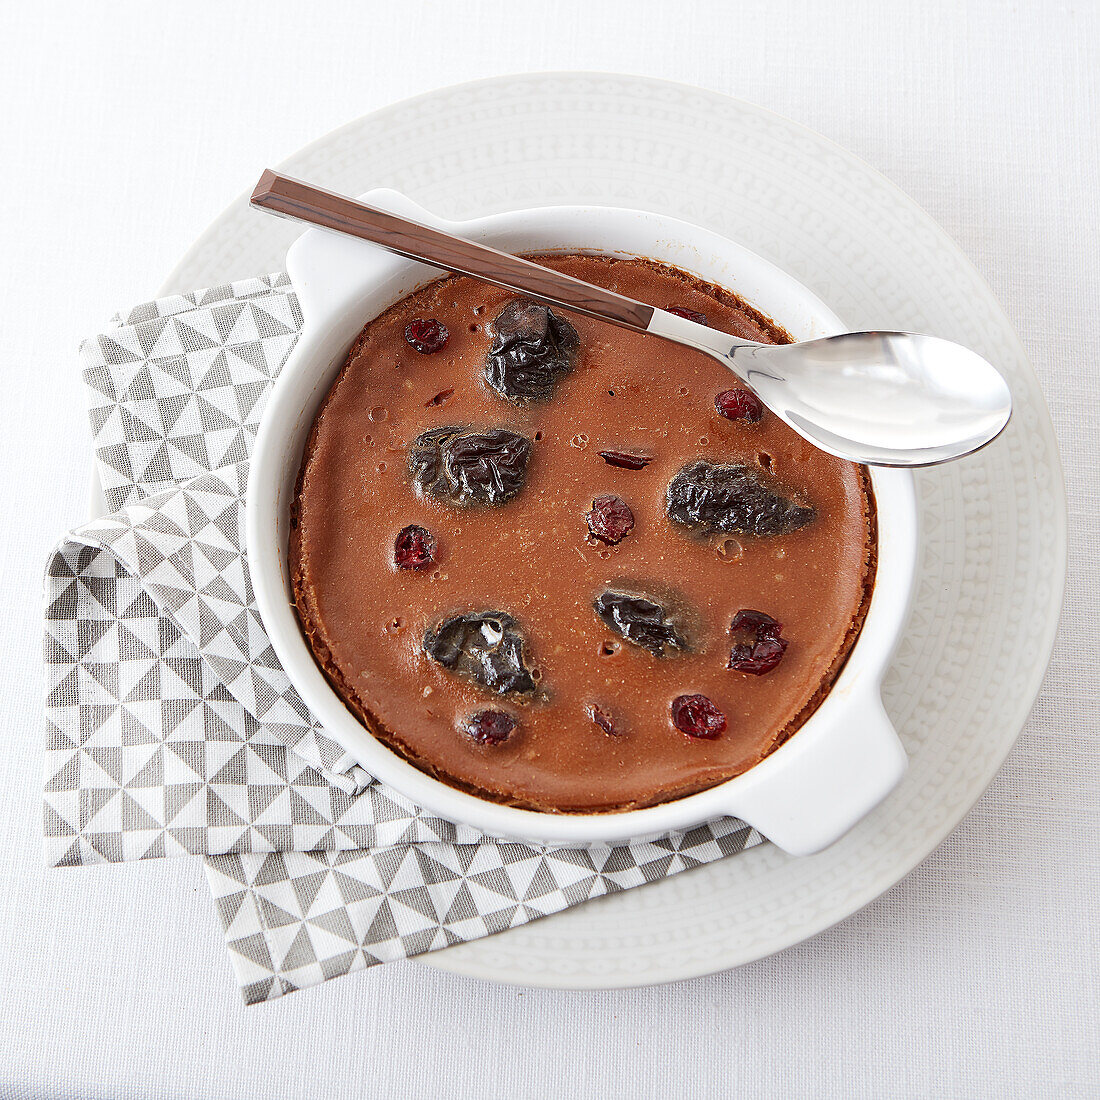 Far with prunes and dried cranberries (France)